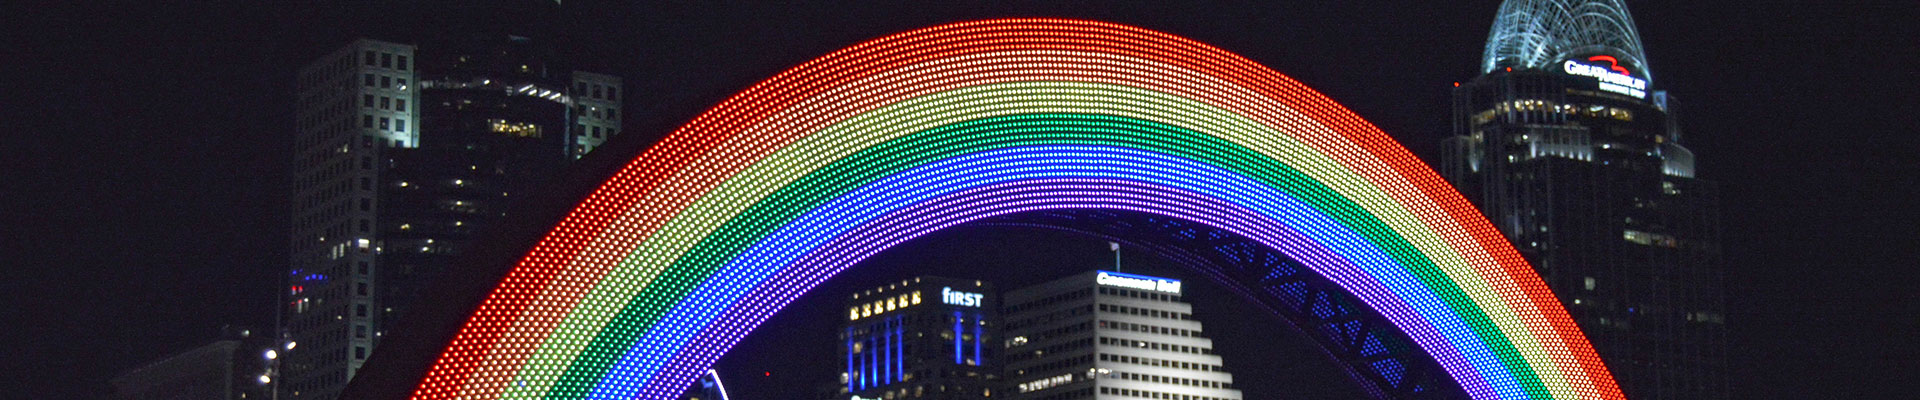 A picture of the Cincinnati skyline at night with rainbow LED lights.